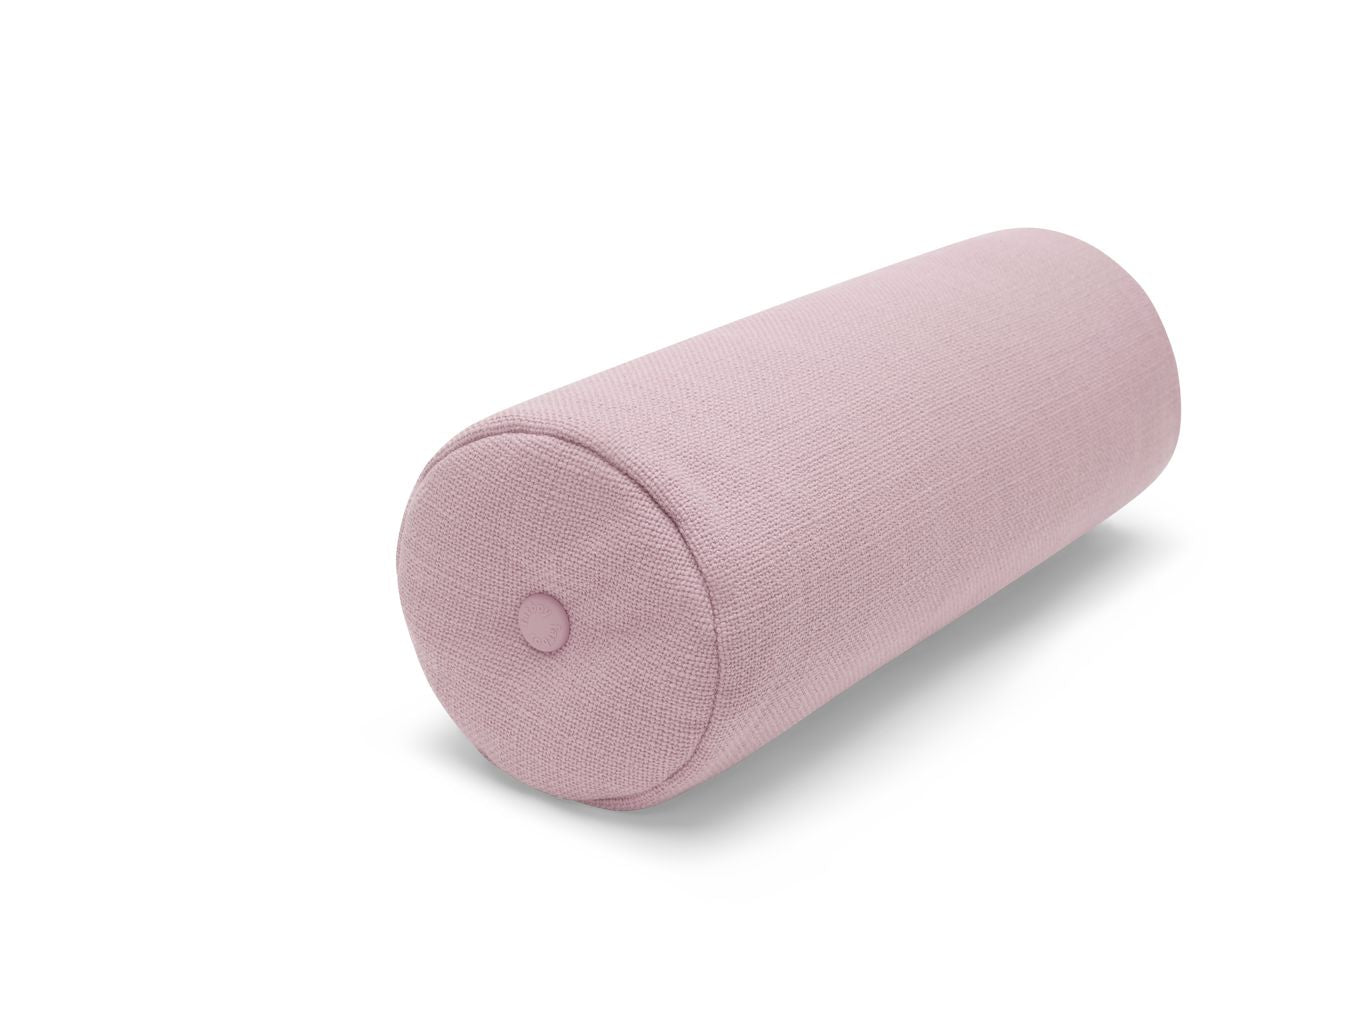 Fatboy Puff Weave Rolster Pillow, Bubble Pink